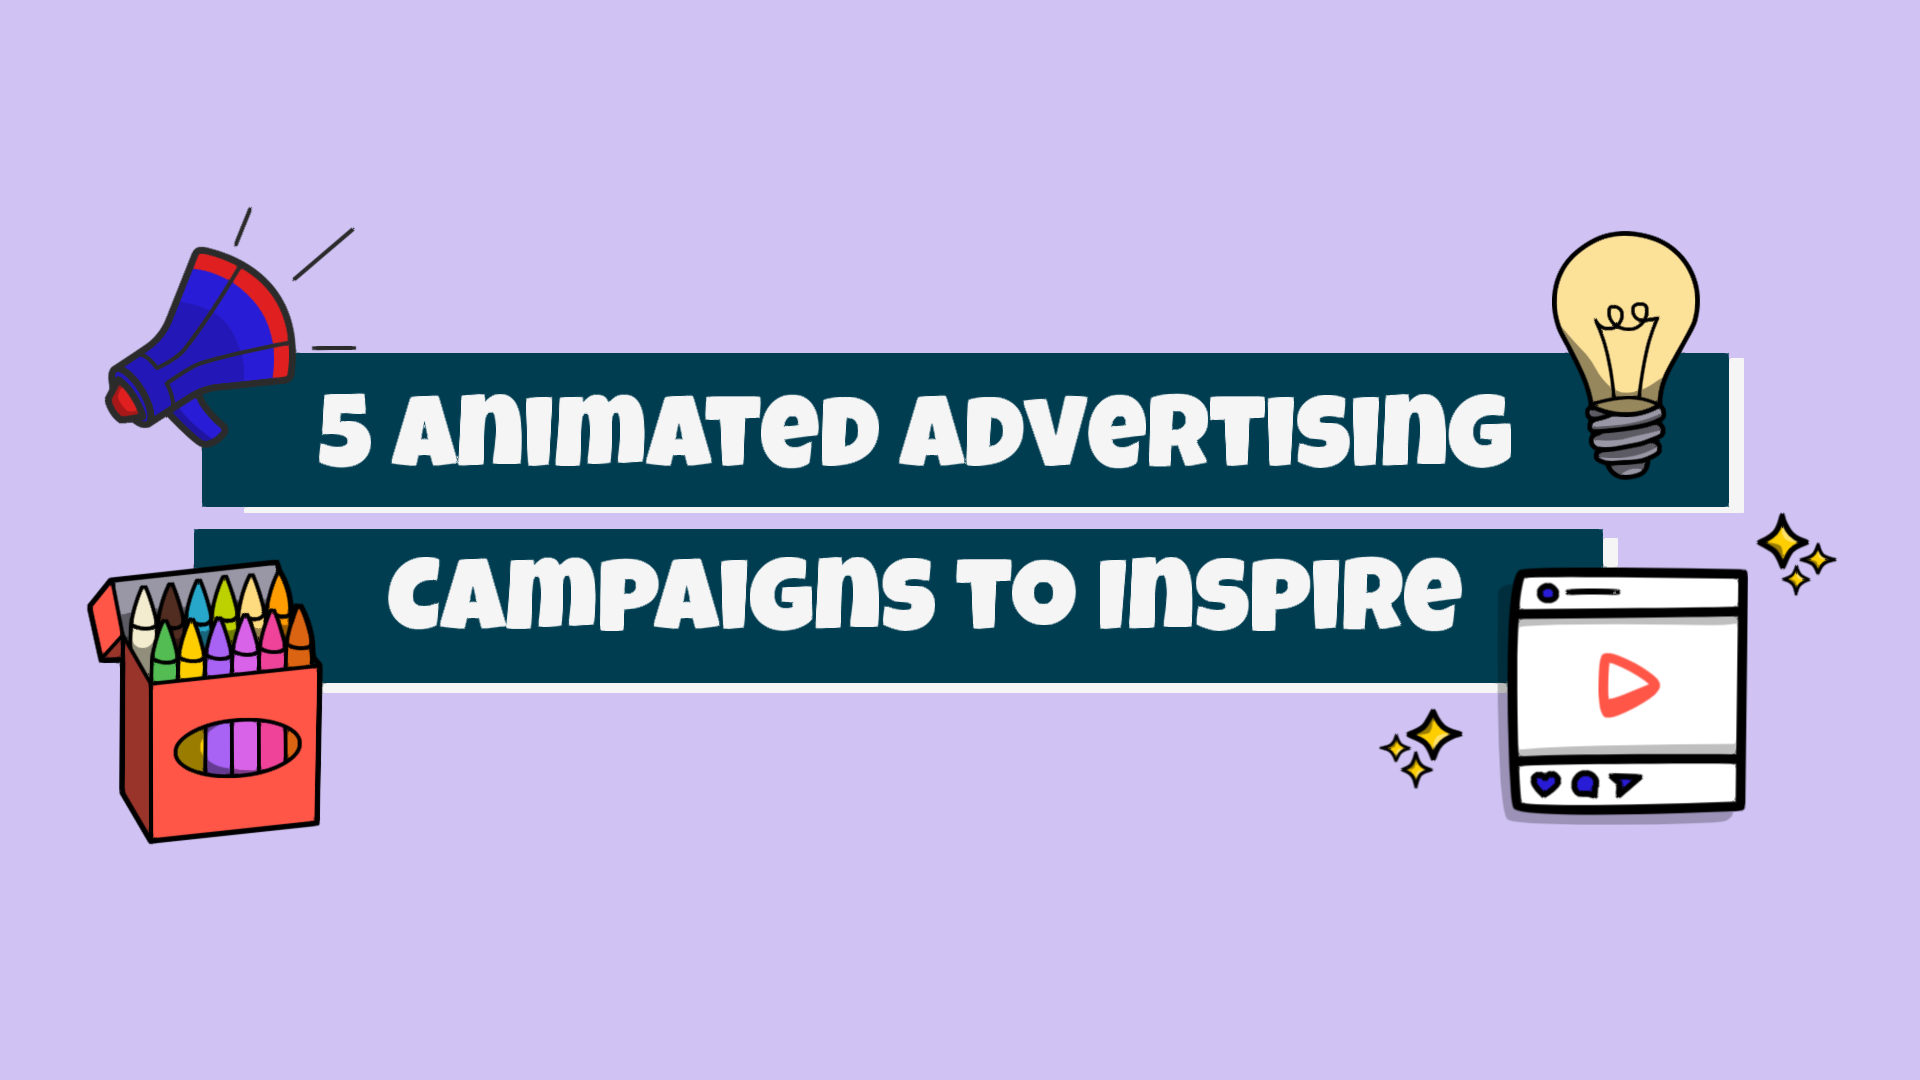 5 Animated Advertising Campaigns to Inspire